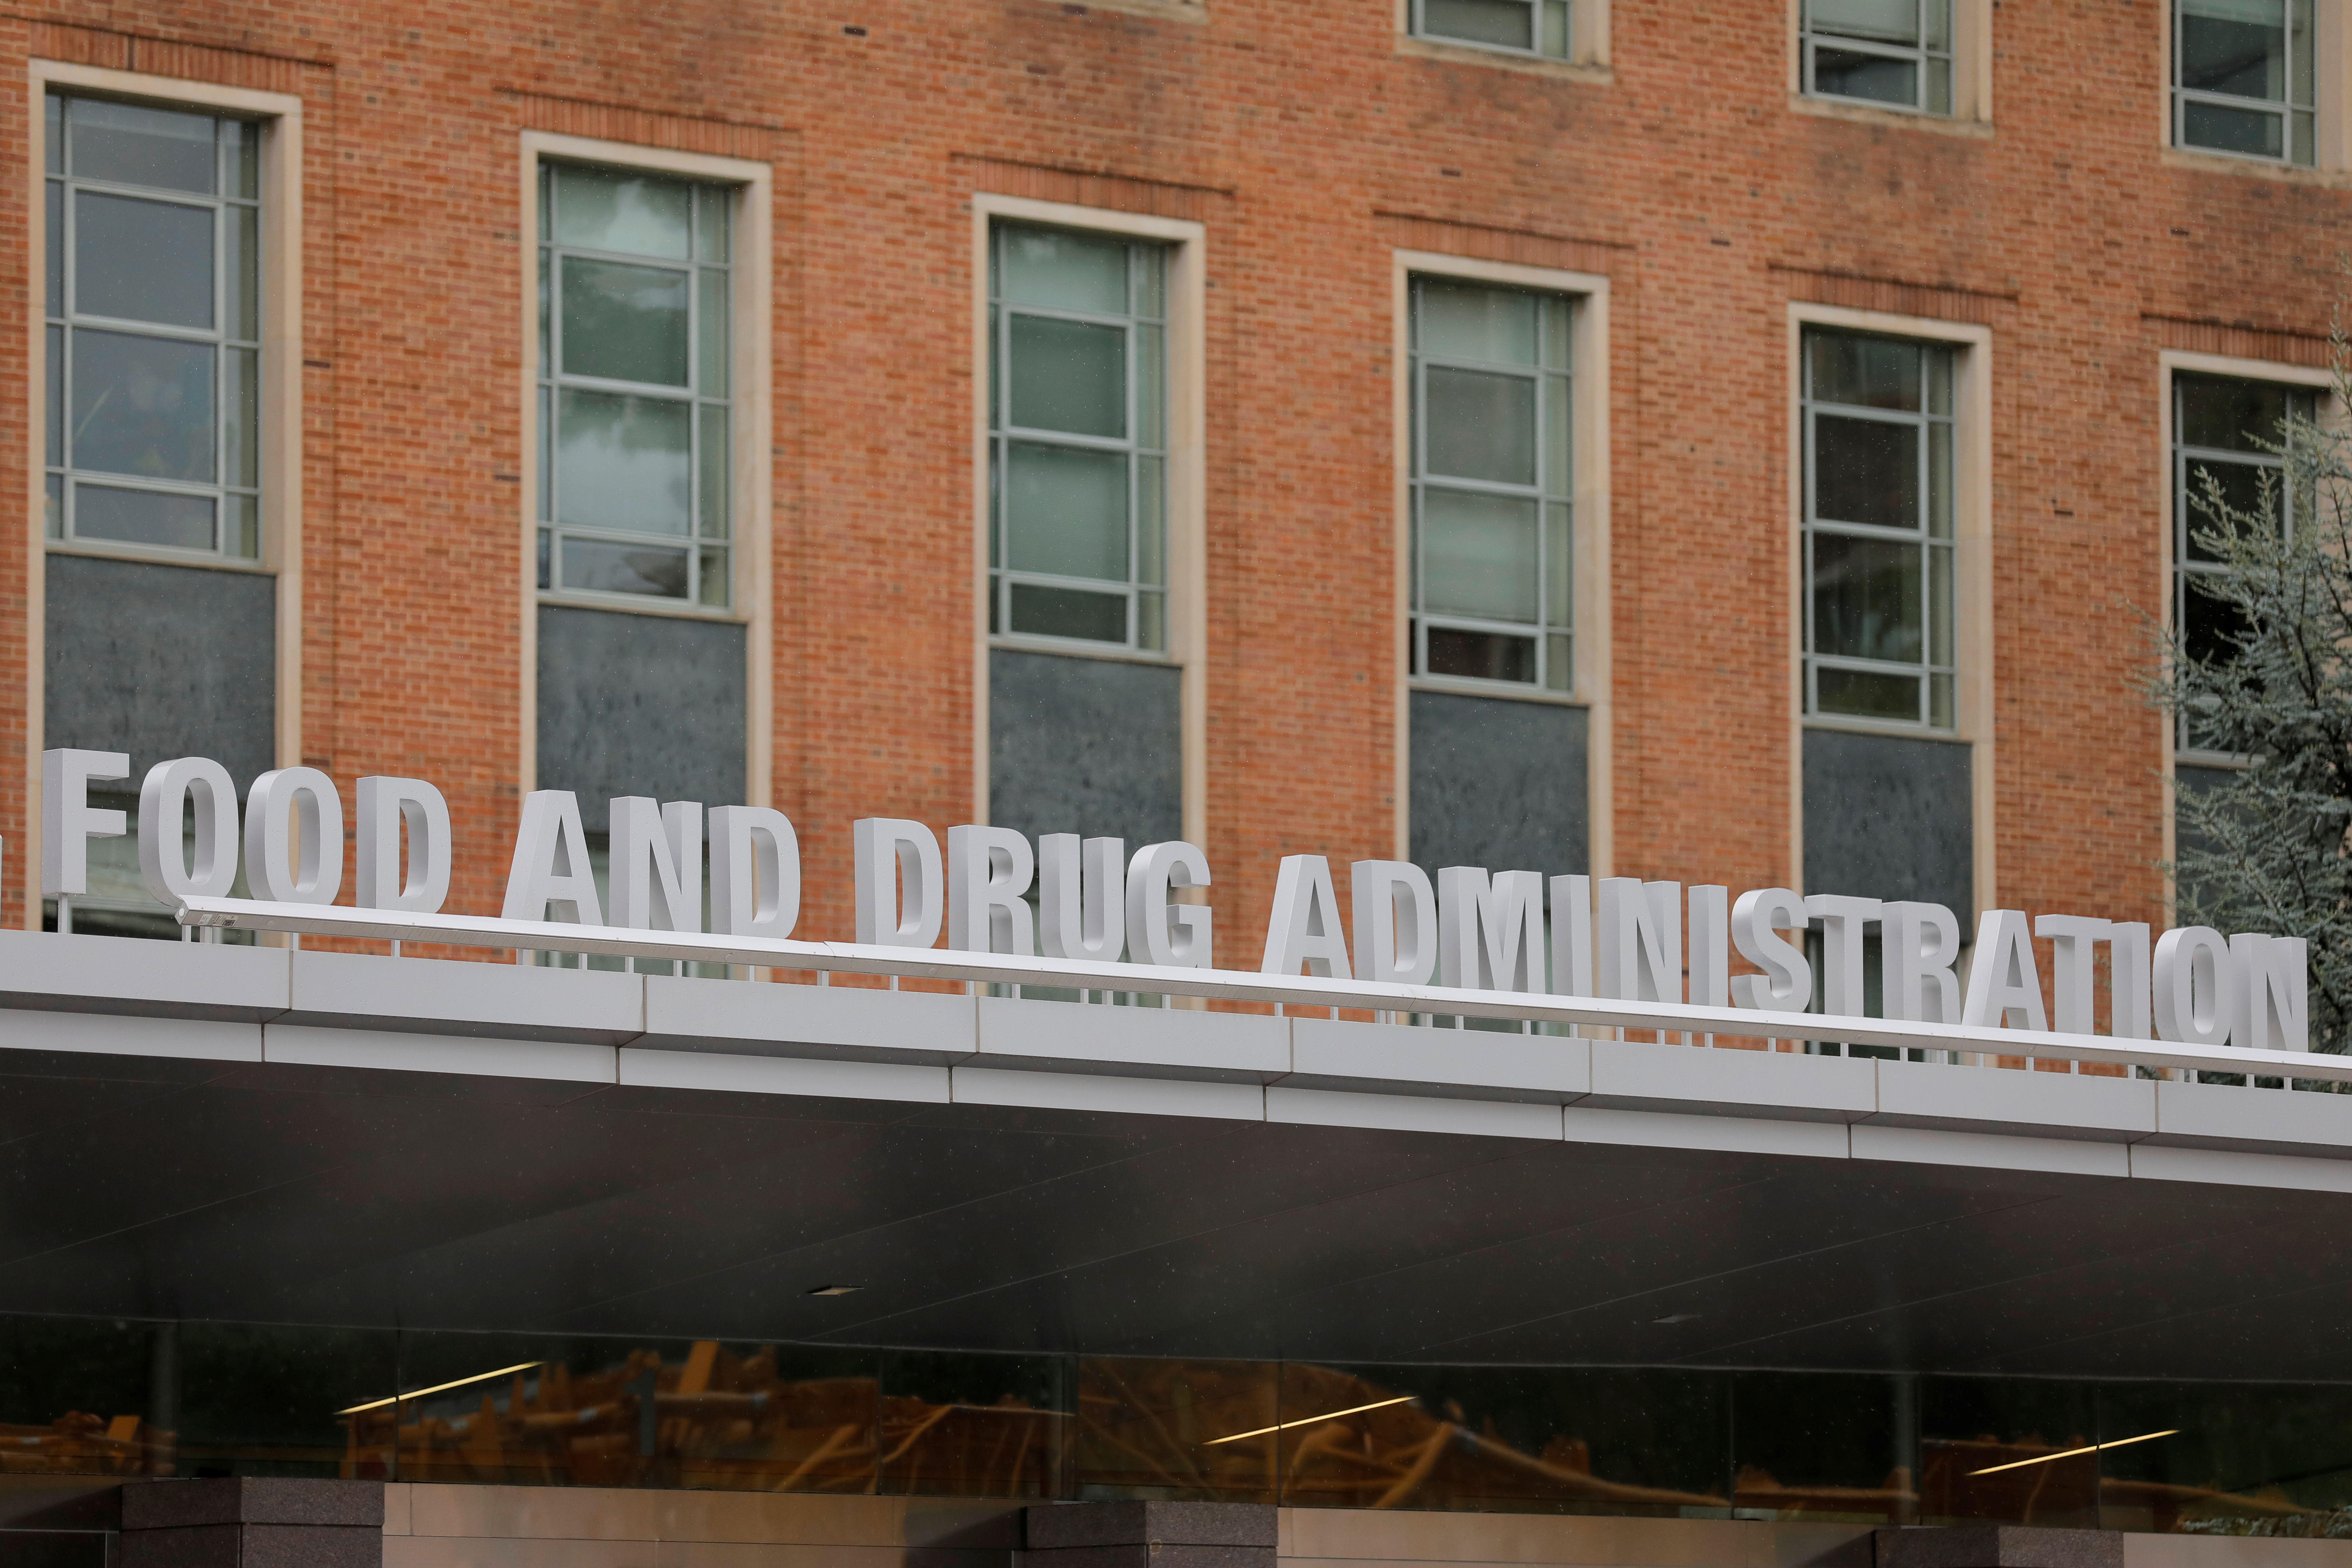 Signage is seen outside of FDA headquarters in White Oak, Maryland